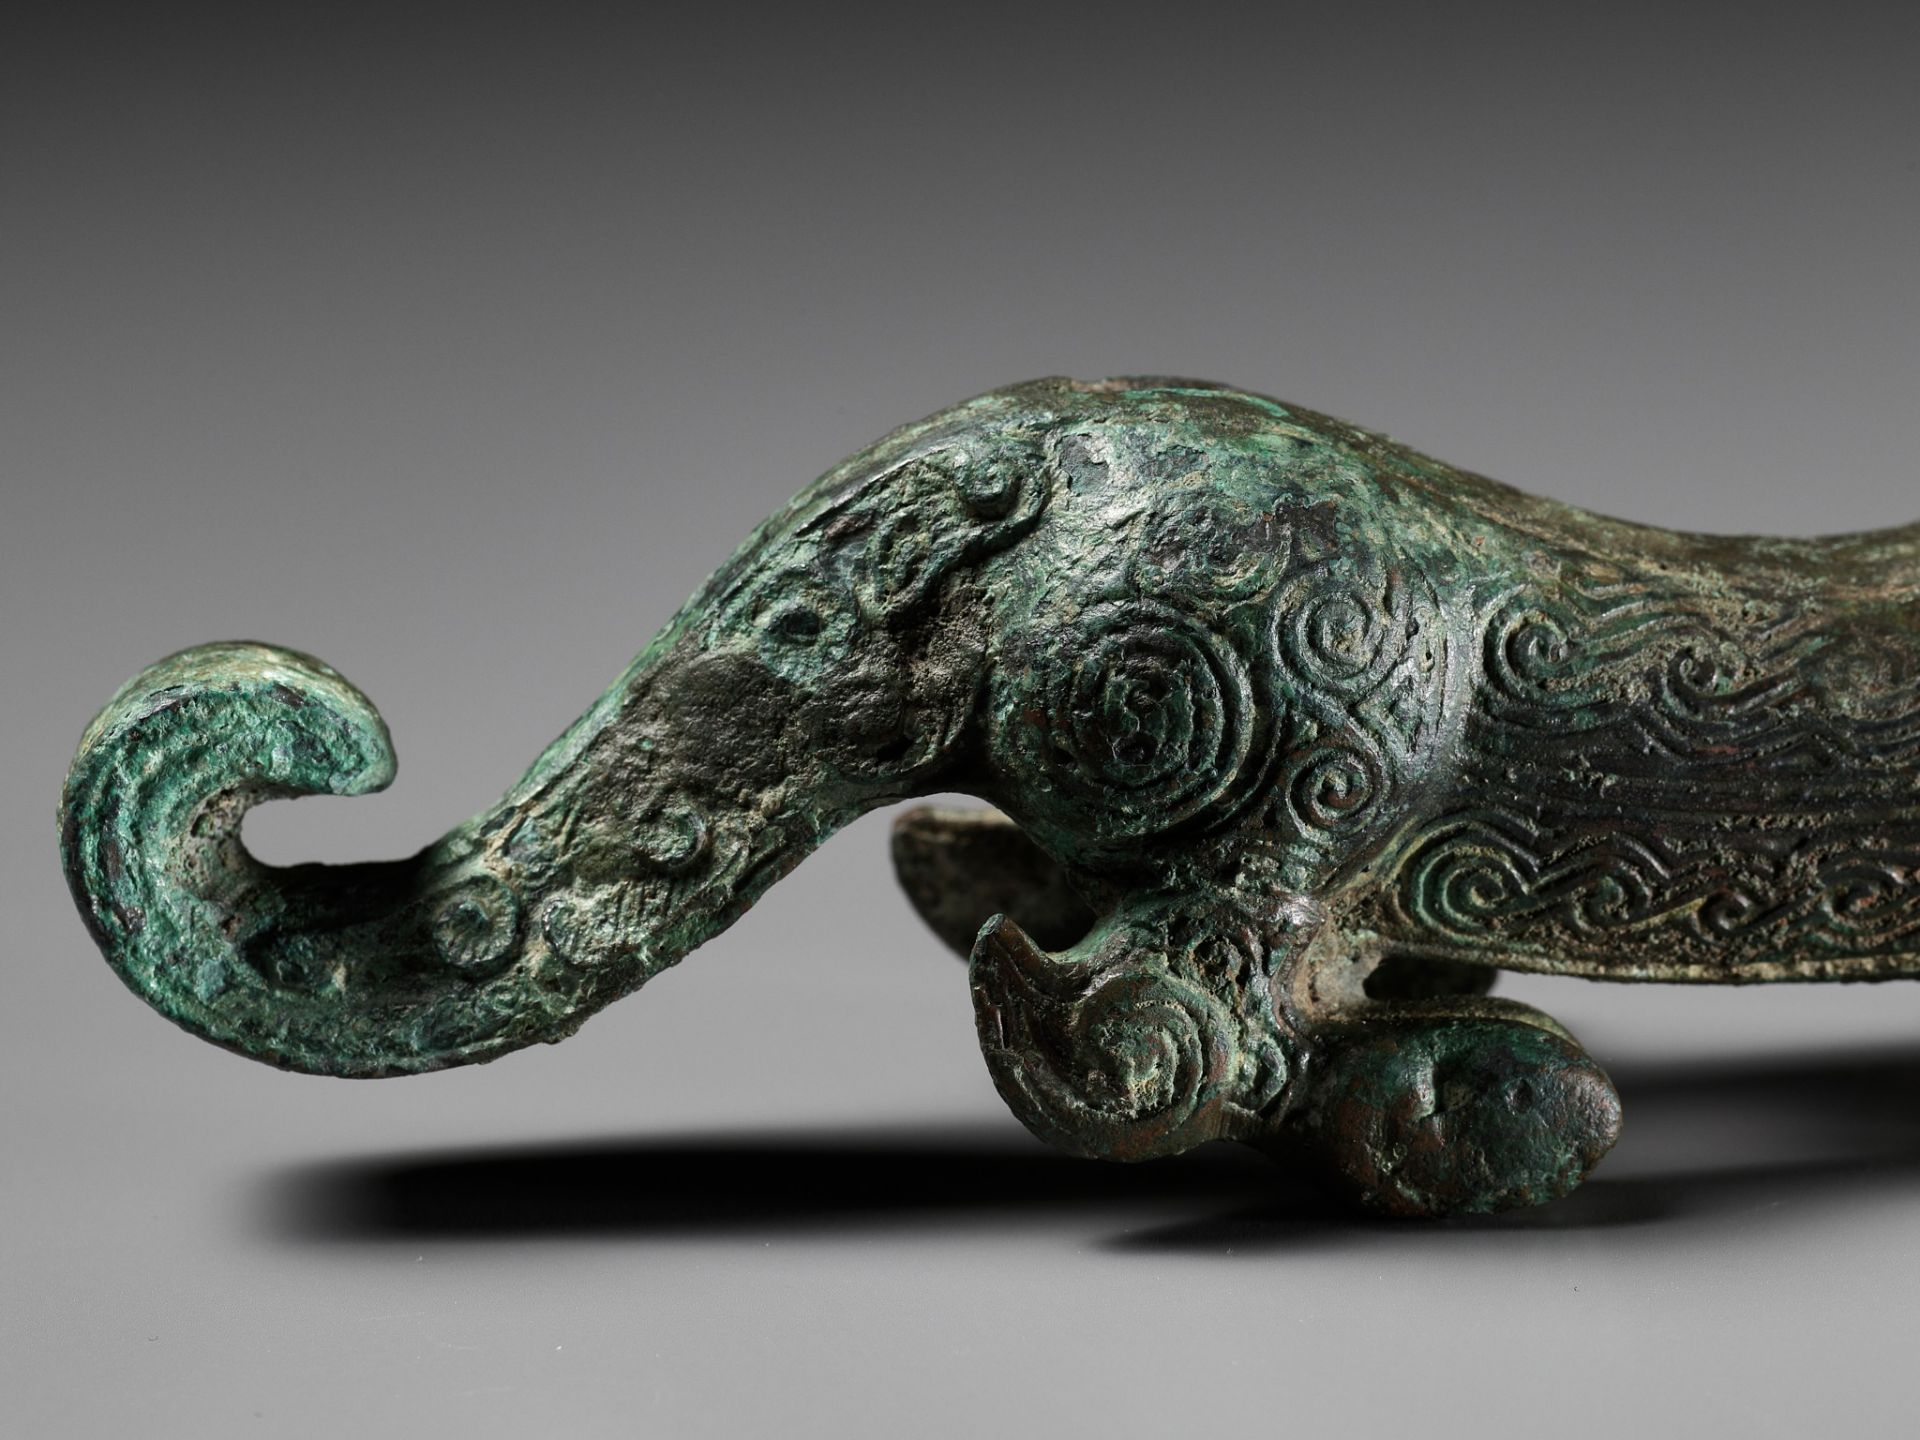 A SUPERB BRONZE FIGURE OF A DRAGON, EASTERN ZHOU DYNASTY, CHINA, 770-256 BC - Image 20 of 23